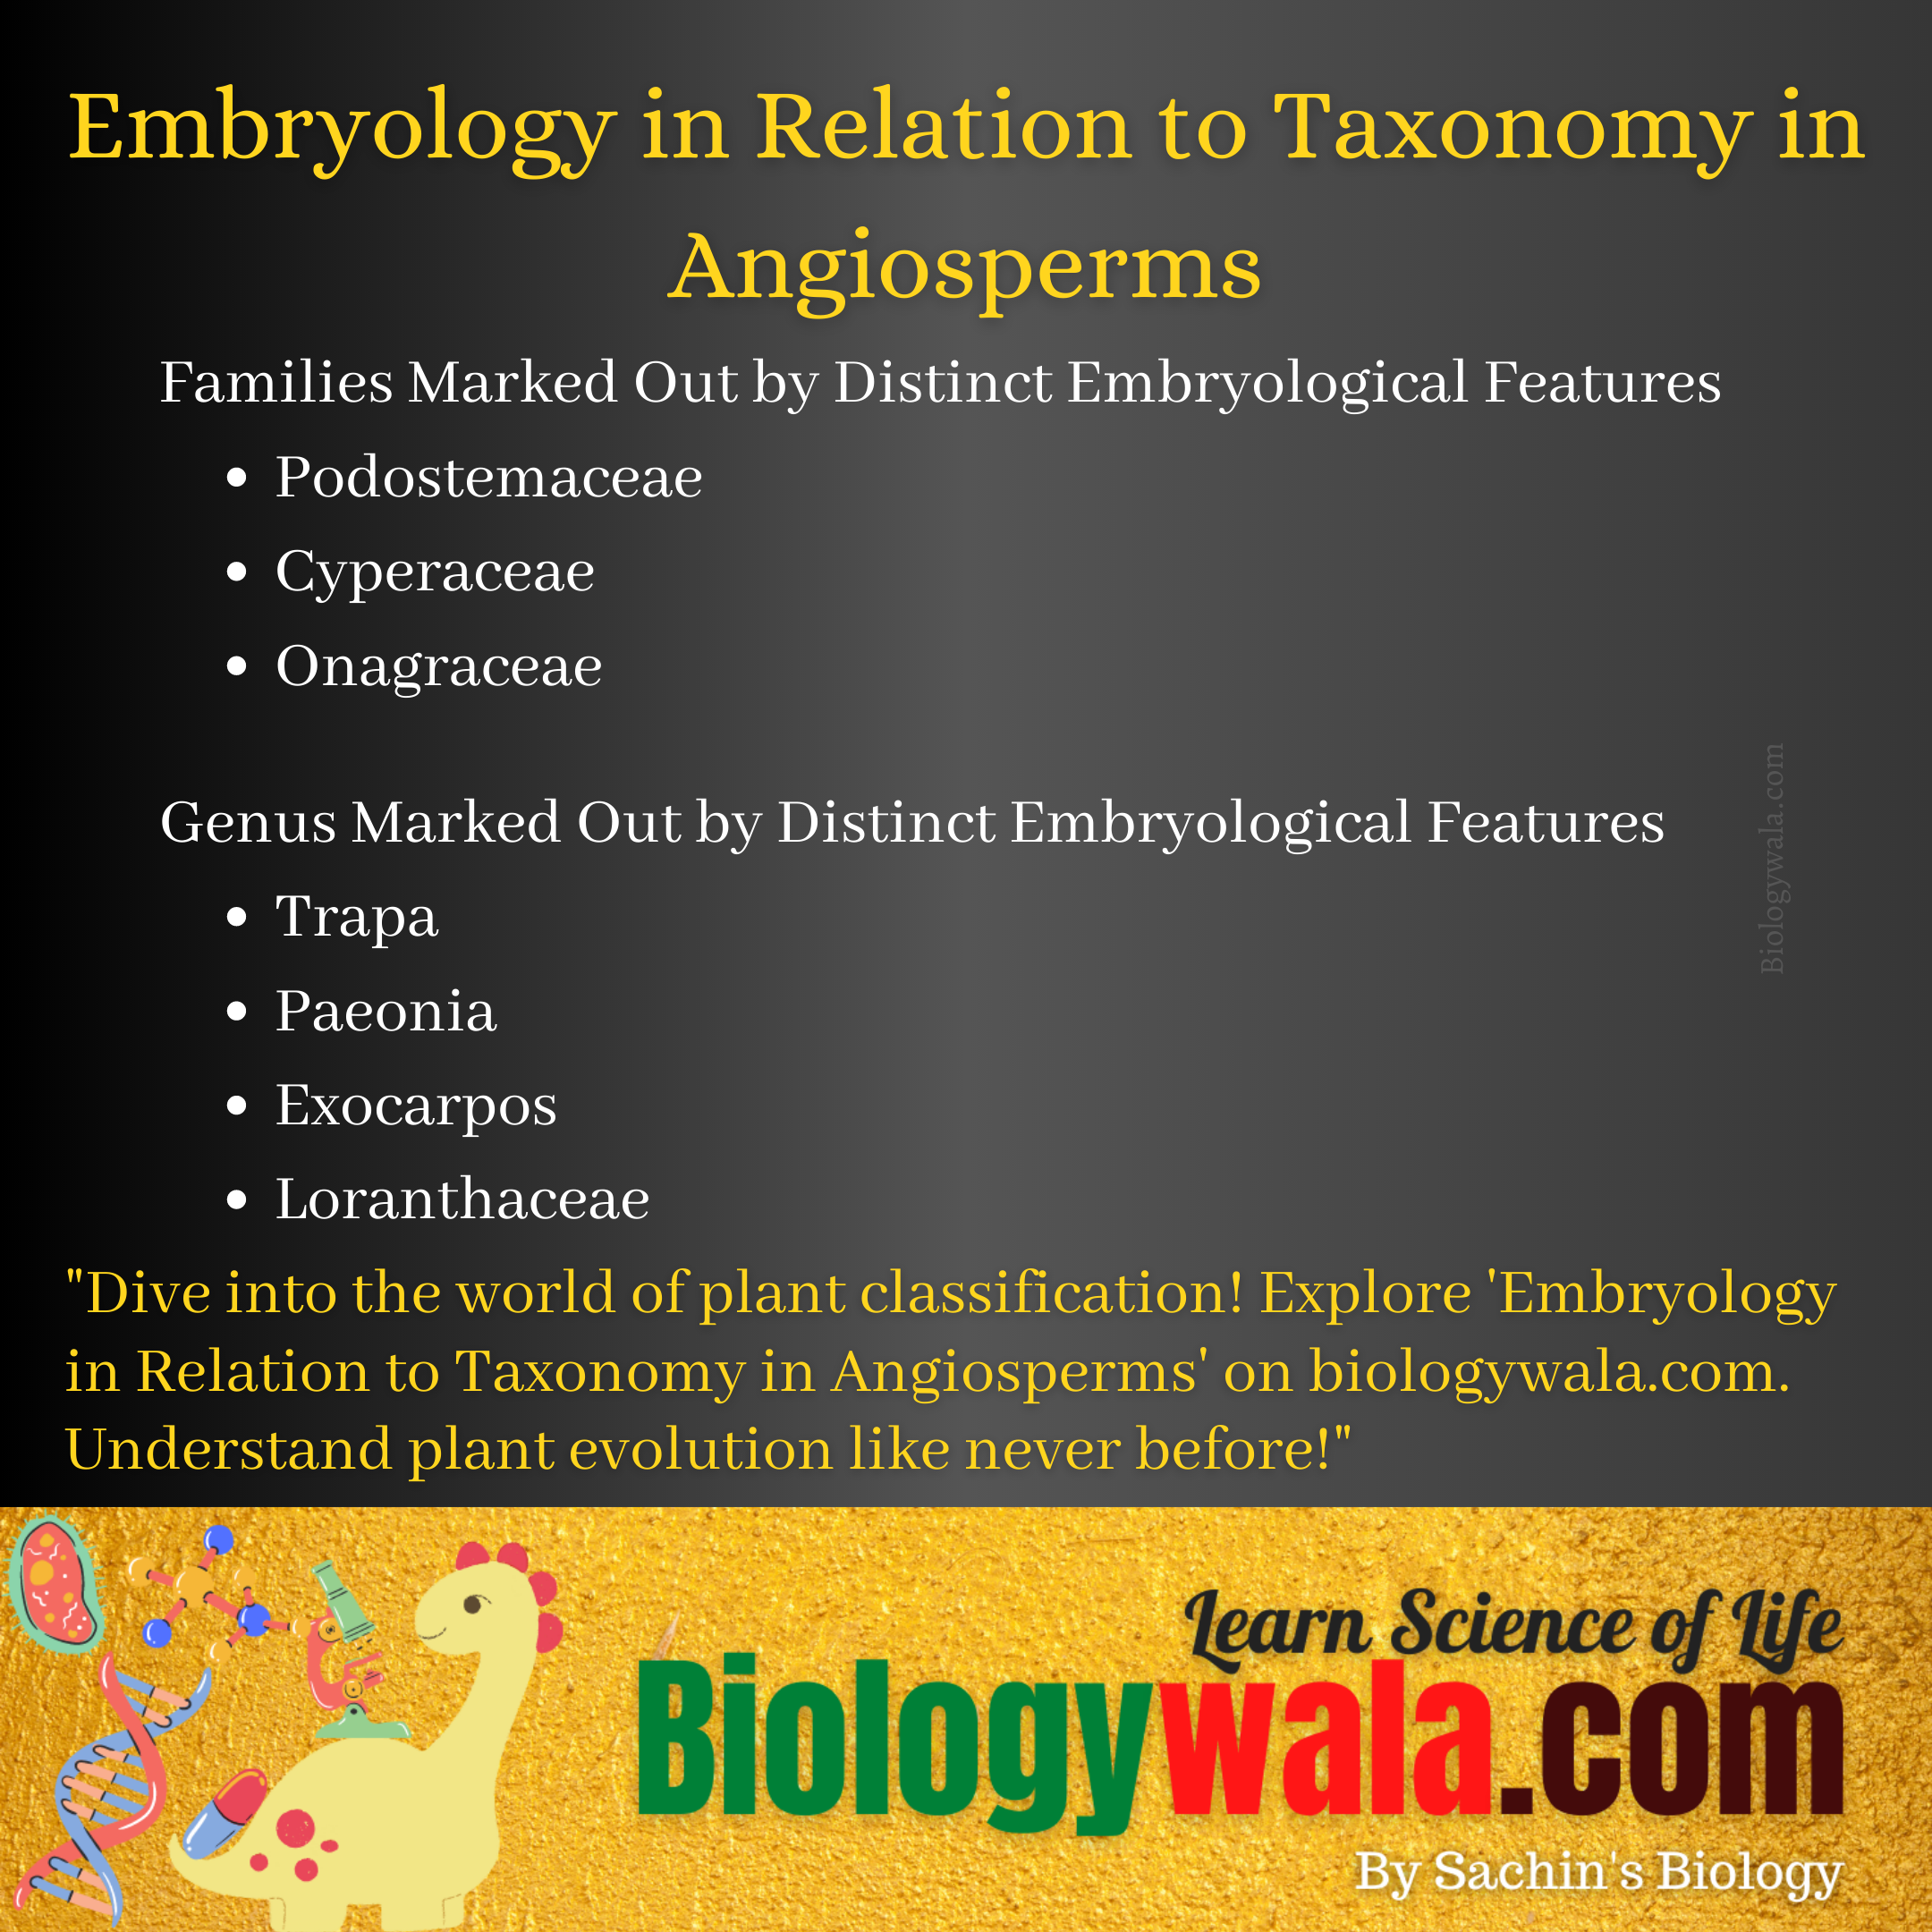 [PDF] Embryology in Relation to Angiosperms Taxonomy | Role of Embryology in Taxonomy